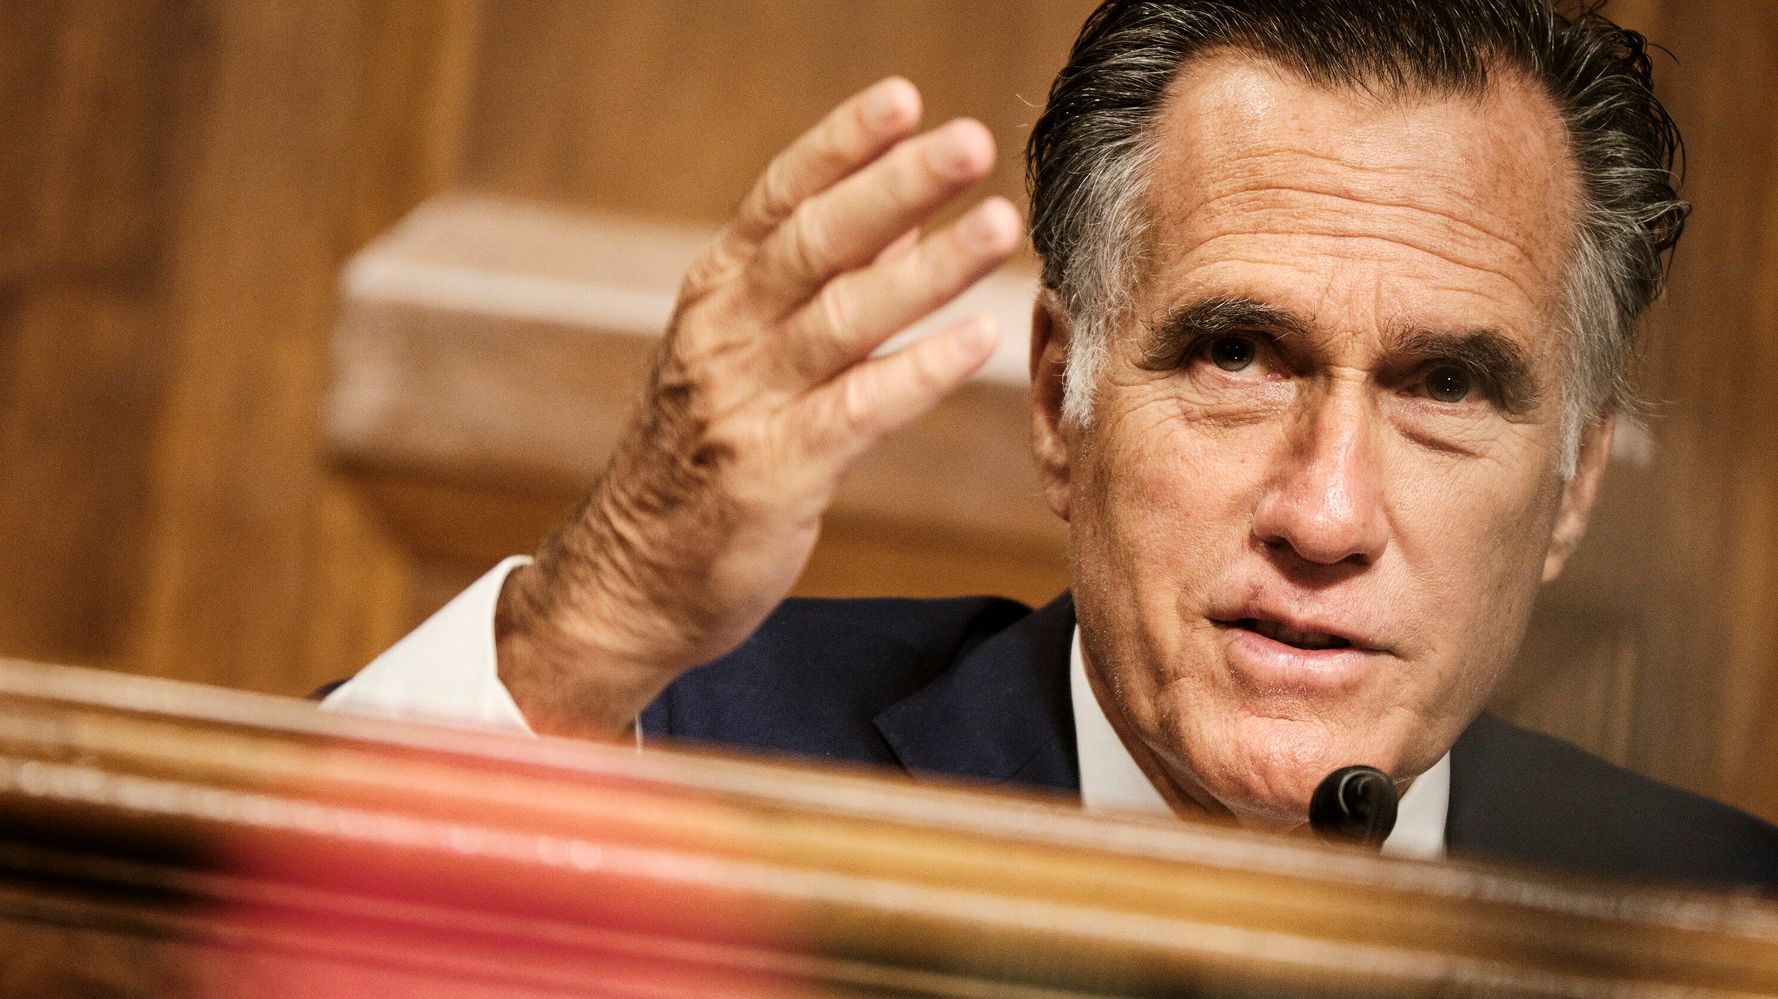 'I Was There': Mitt Romney Sets Record Straight On Jan. 6 Insurrection